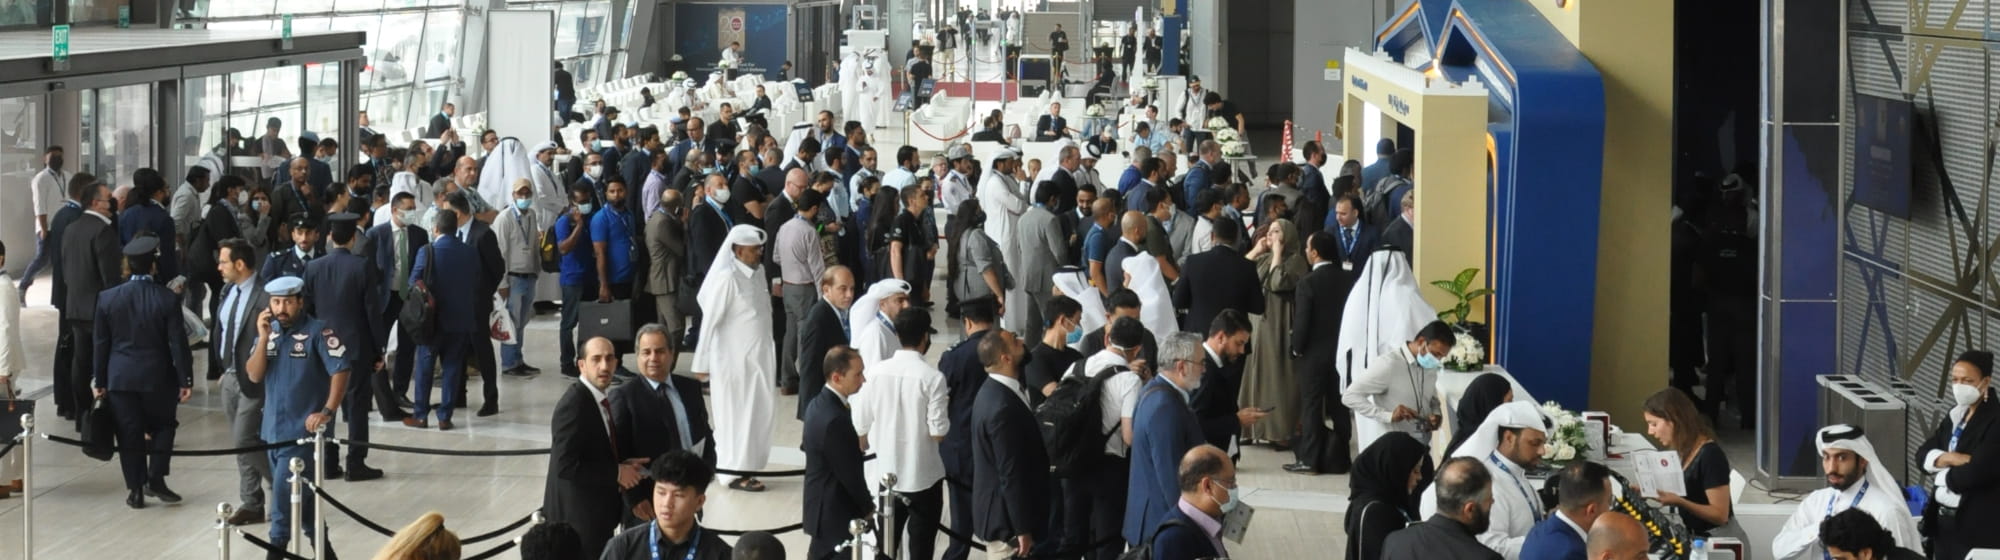 Entrance of Milipol Qatar with welcome desks for exhibitors and visitors